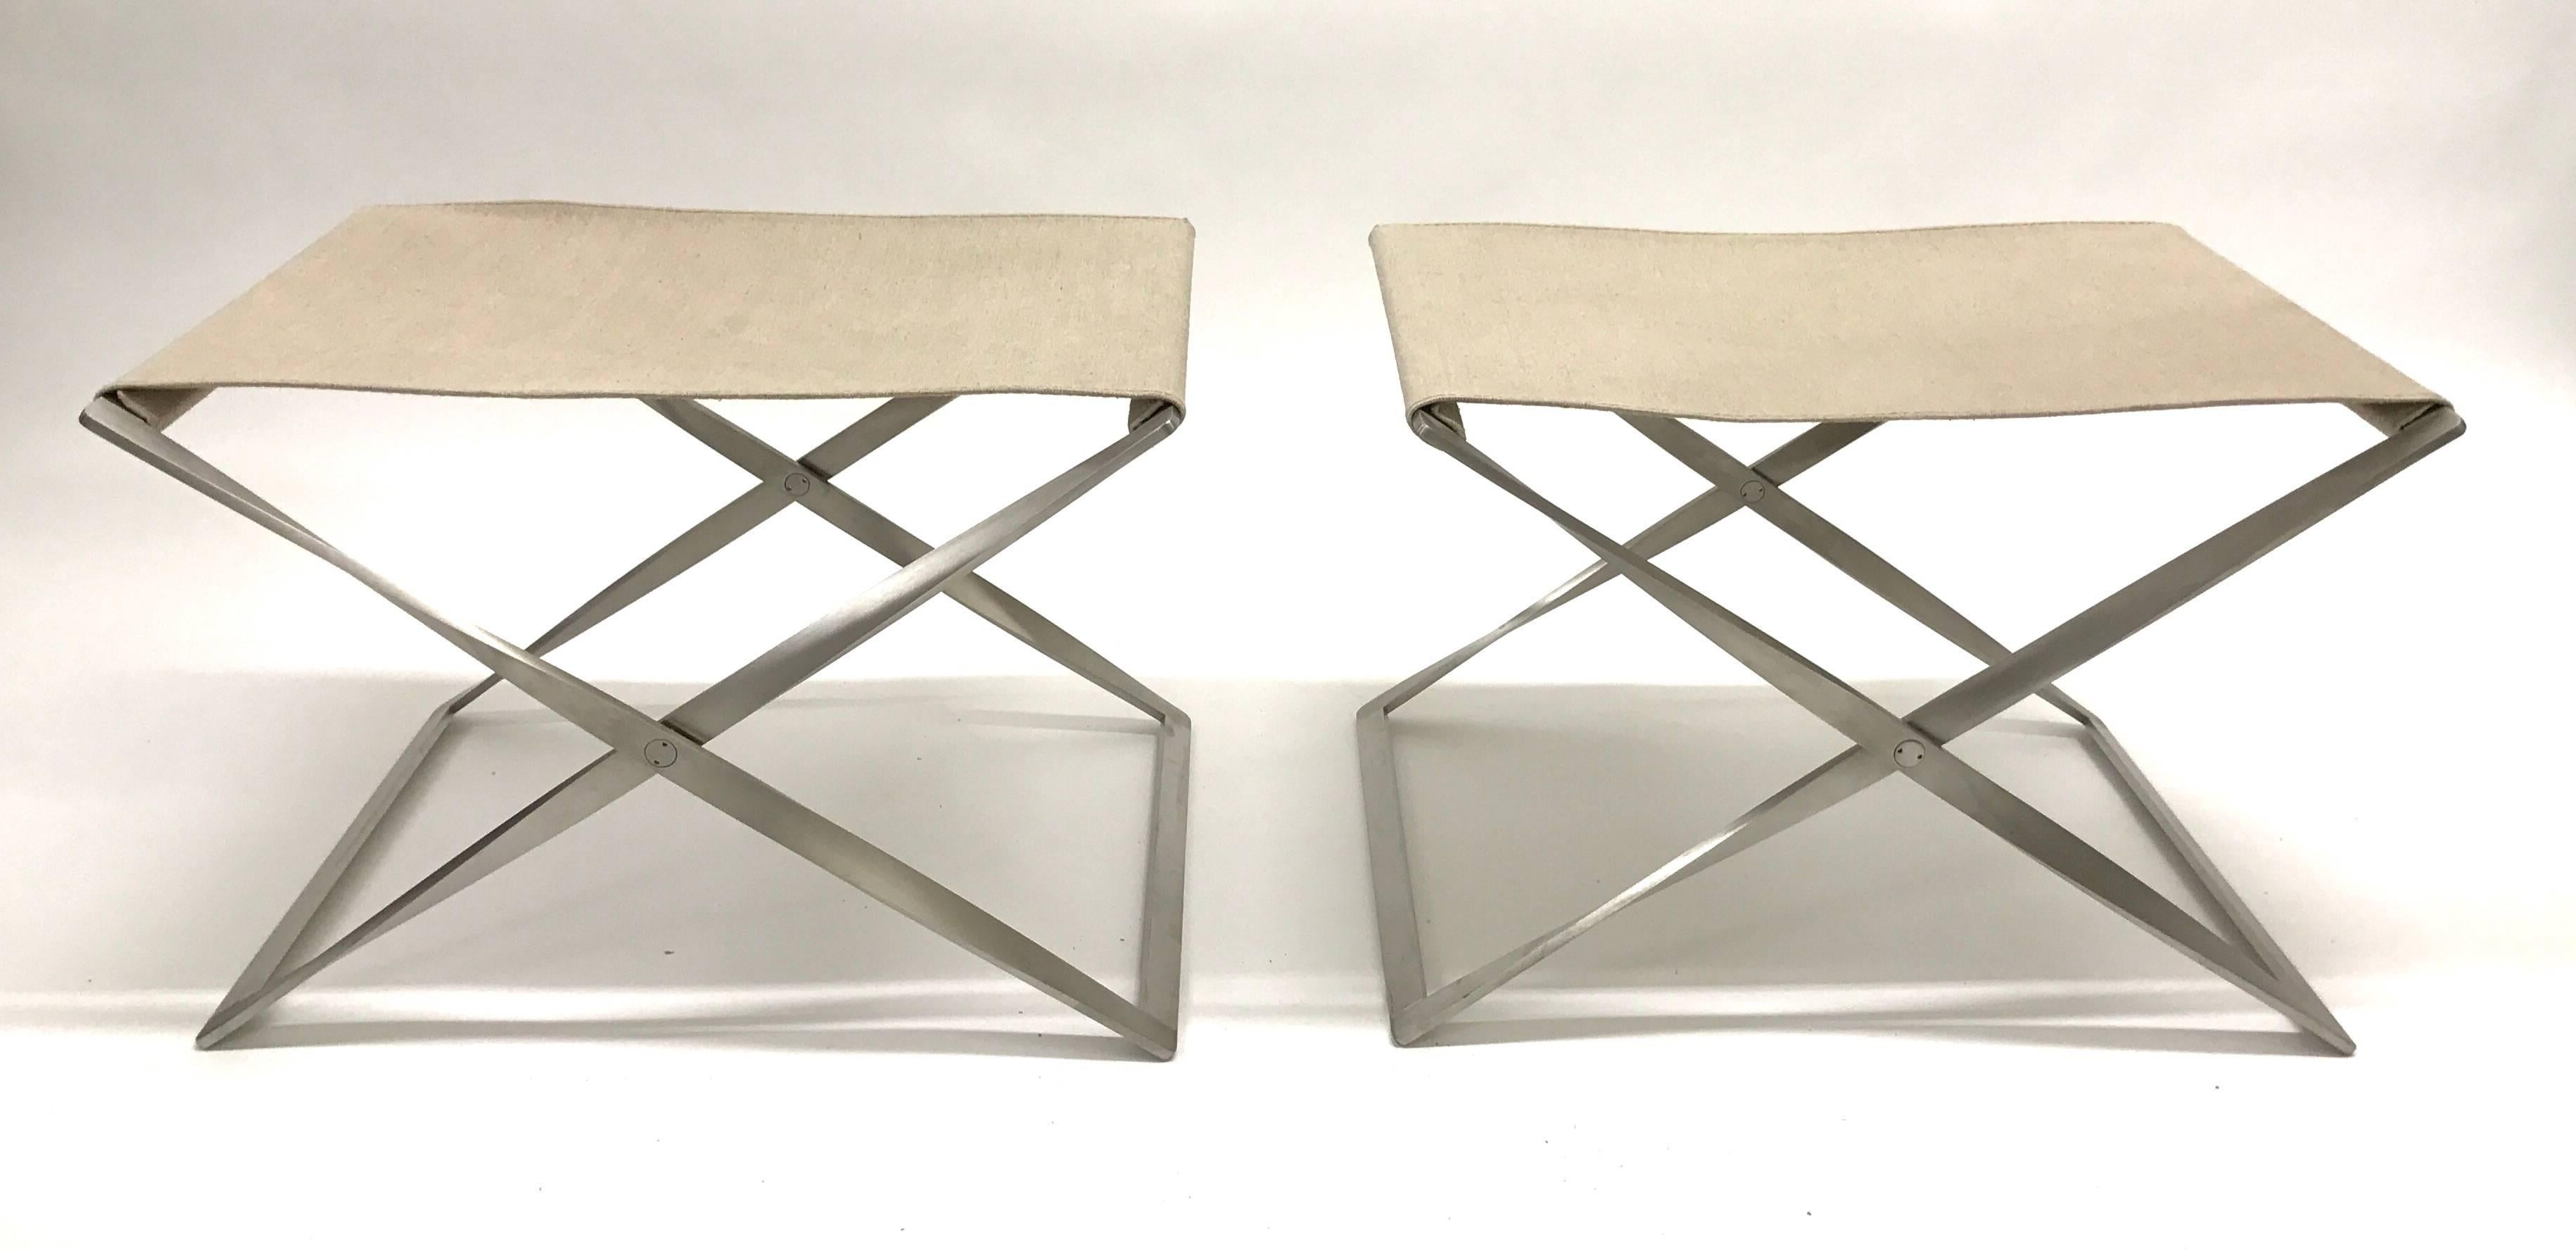 Pair of Poul Kjaerholm PK91 Folding Stools In Good Condition For Sale In Lake Success, NY